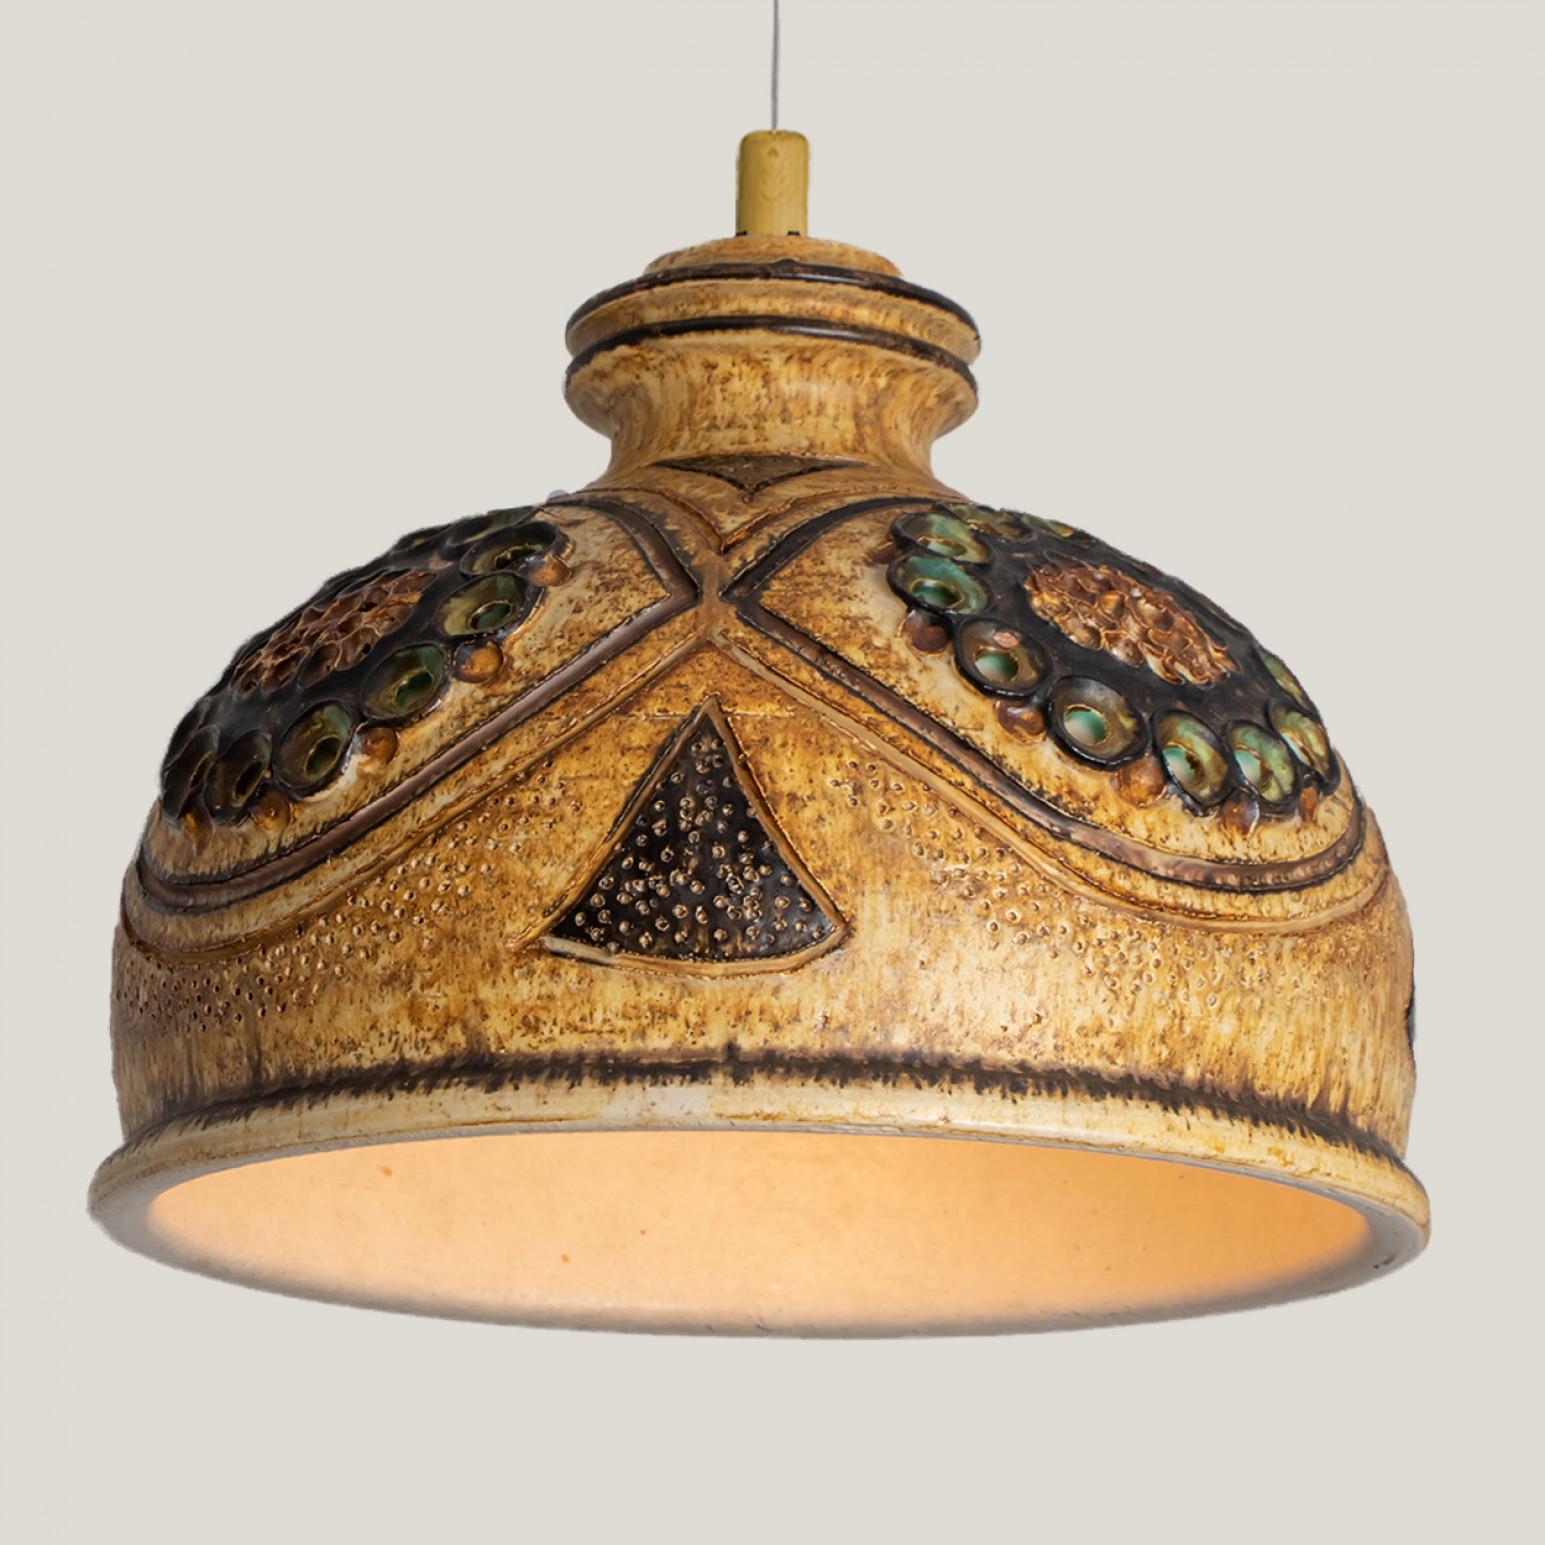 Playful arrangement of stunning round hanging lamps with an unusual shape, made with rich multicolored brown ceramics, manufactured in the 1970s in Denmark. We have a multitude of unique colored ceramic light sets and arrangements, all available in